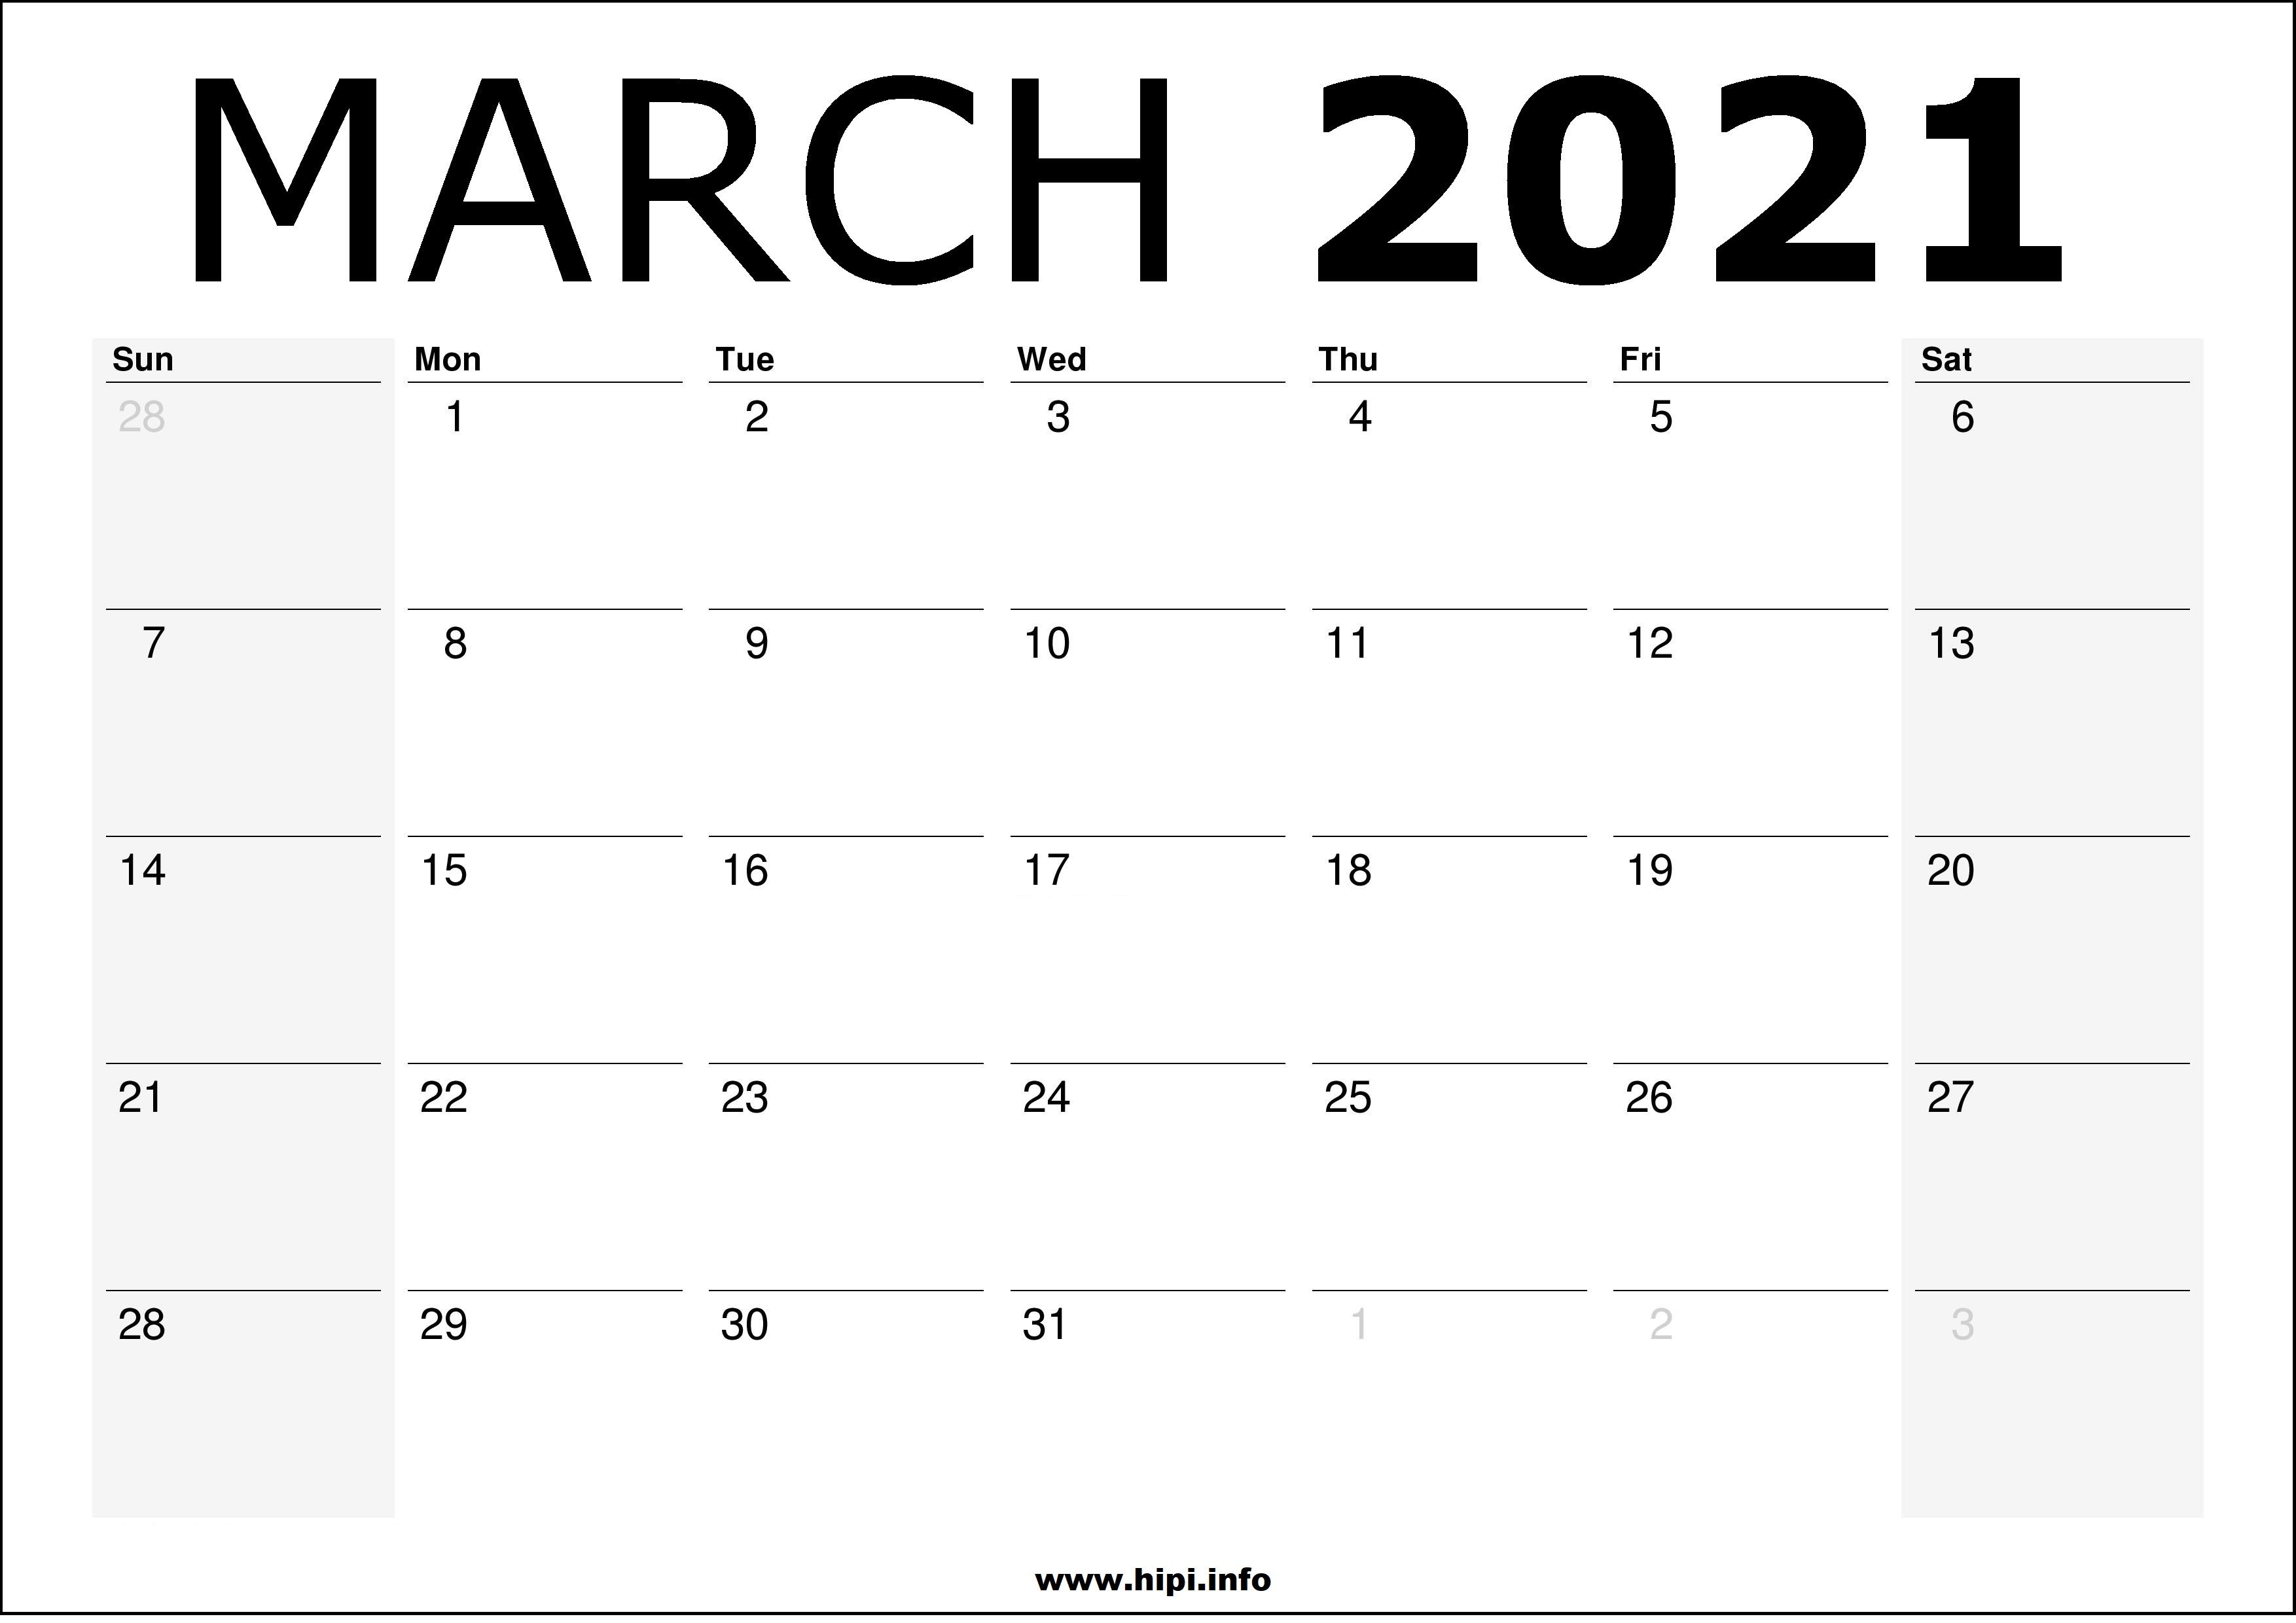 March 2021 Digital Month Calendar Wallpaper Background One day at a time Black /& White